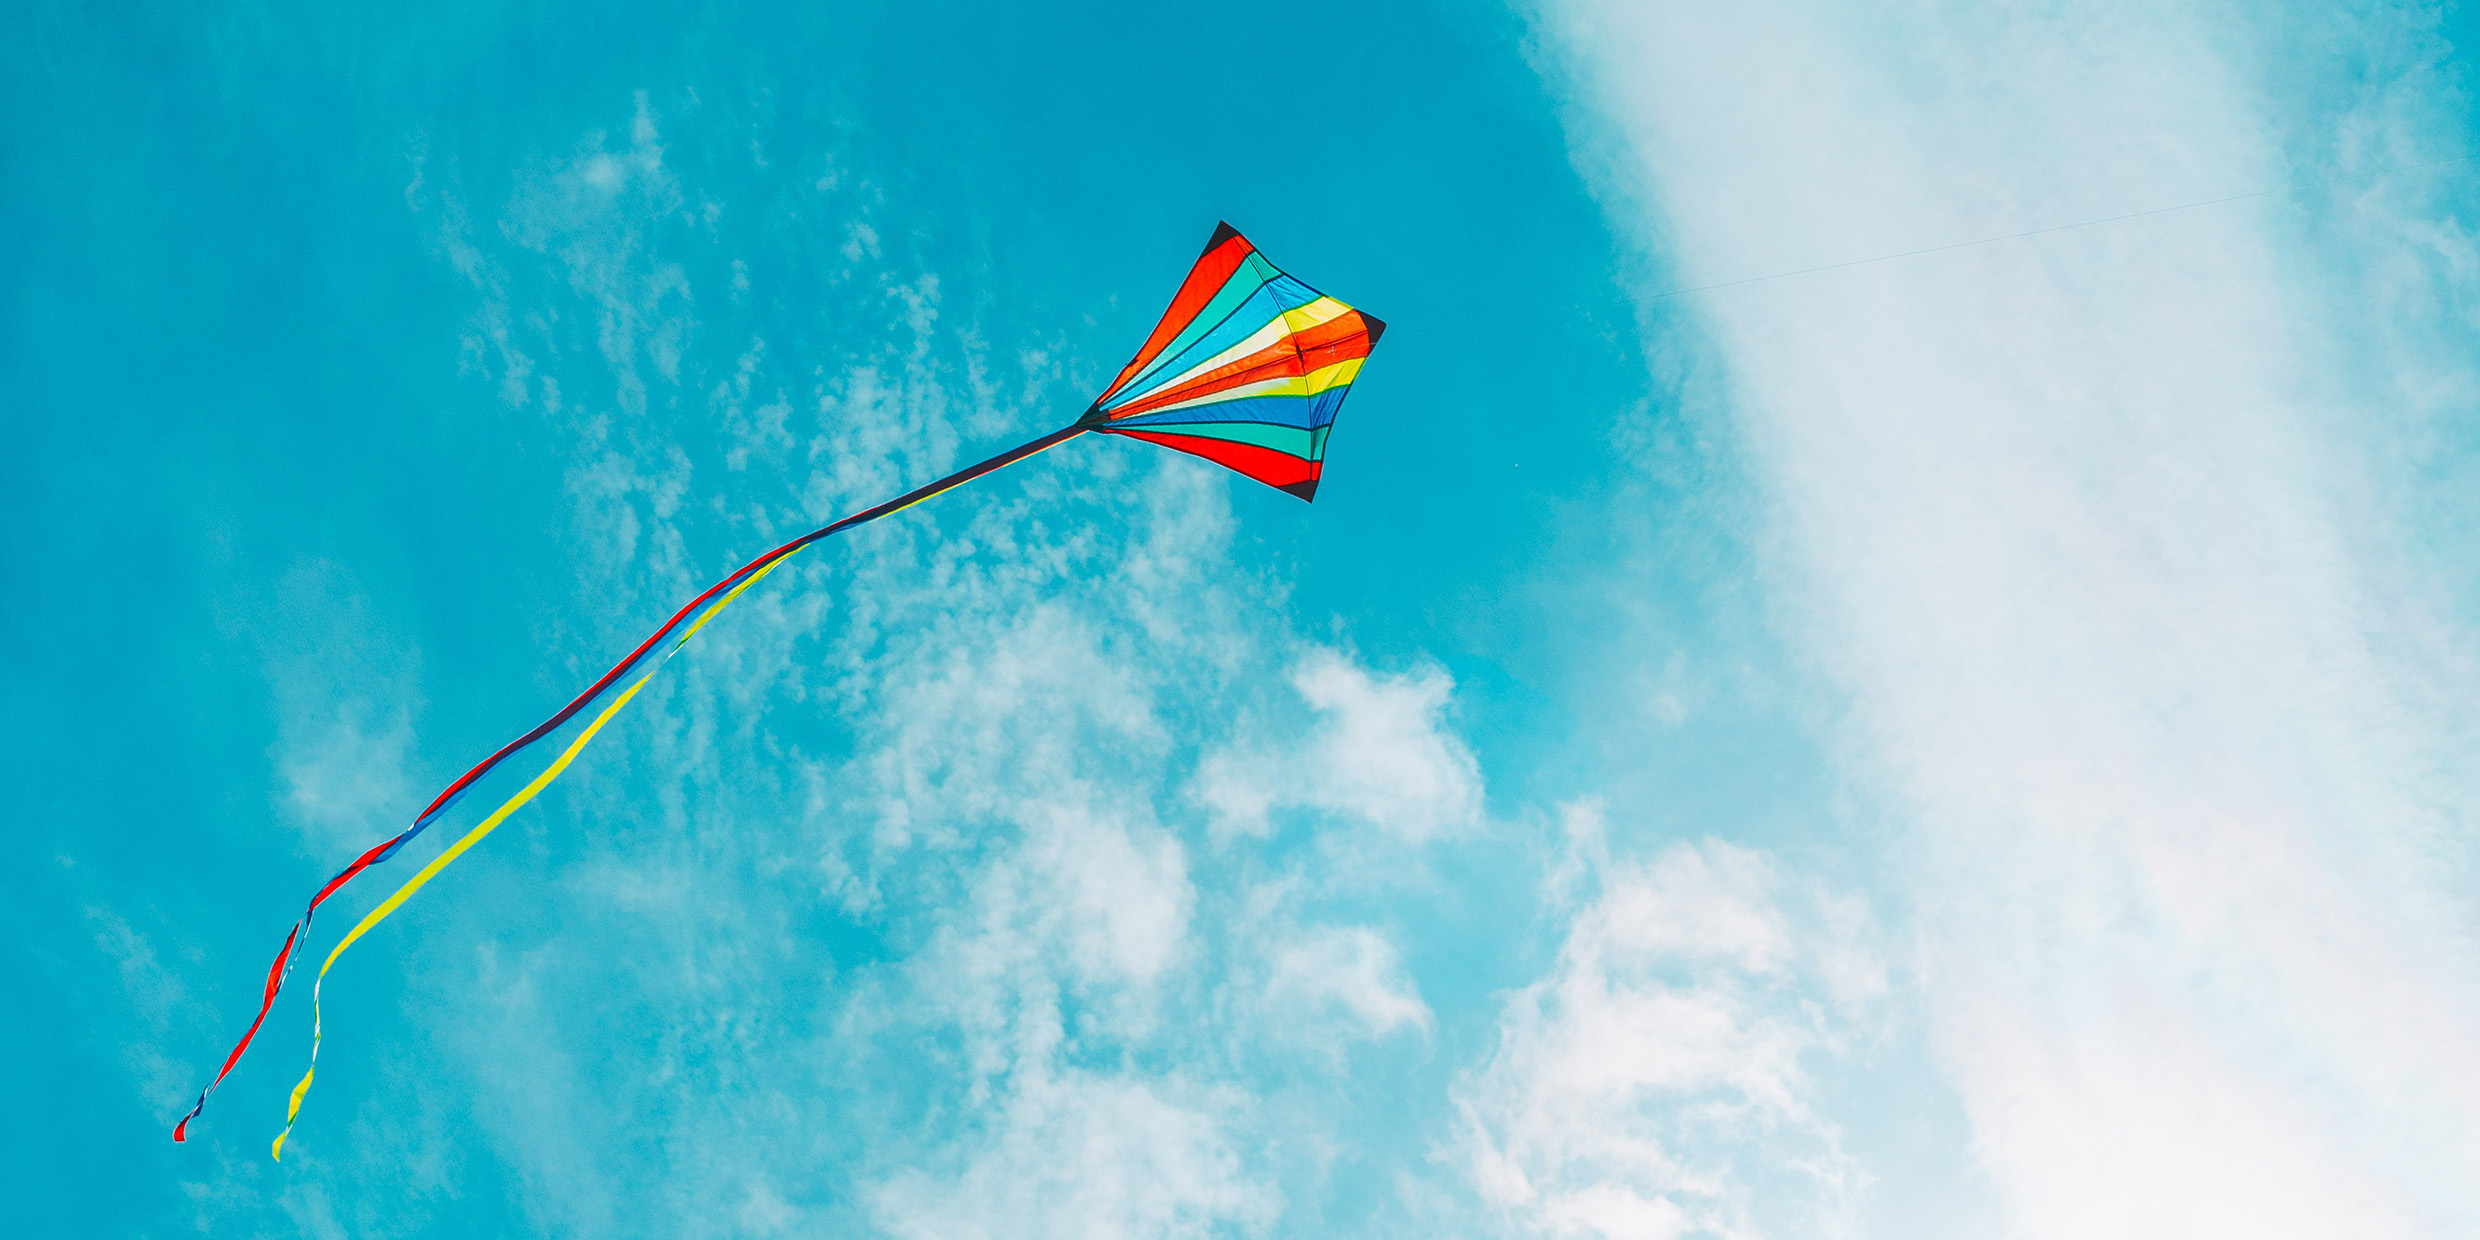 Image of a brightly-colored kite flying in a blue sky